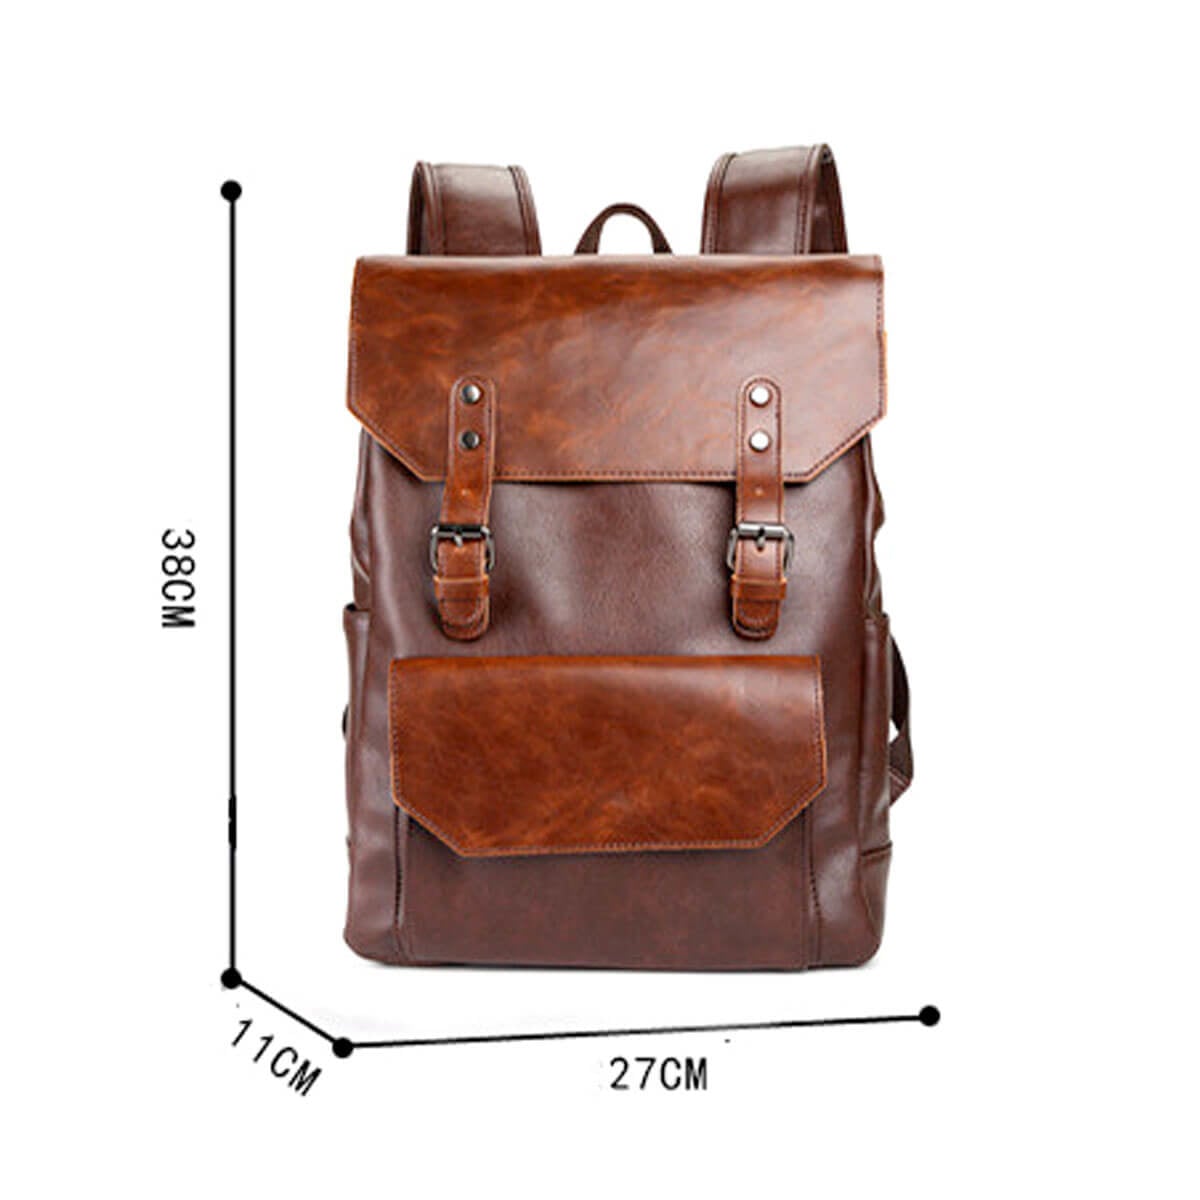 Urban Leather High-Quality Laptop Backpack